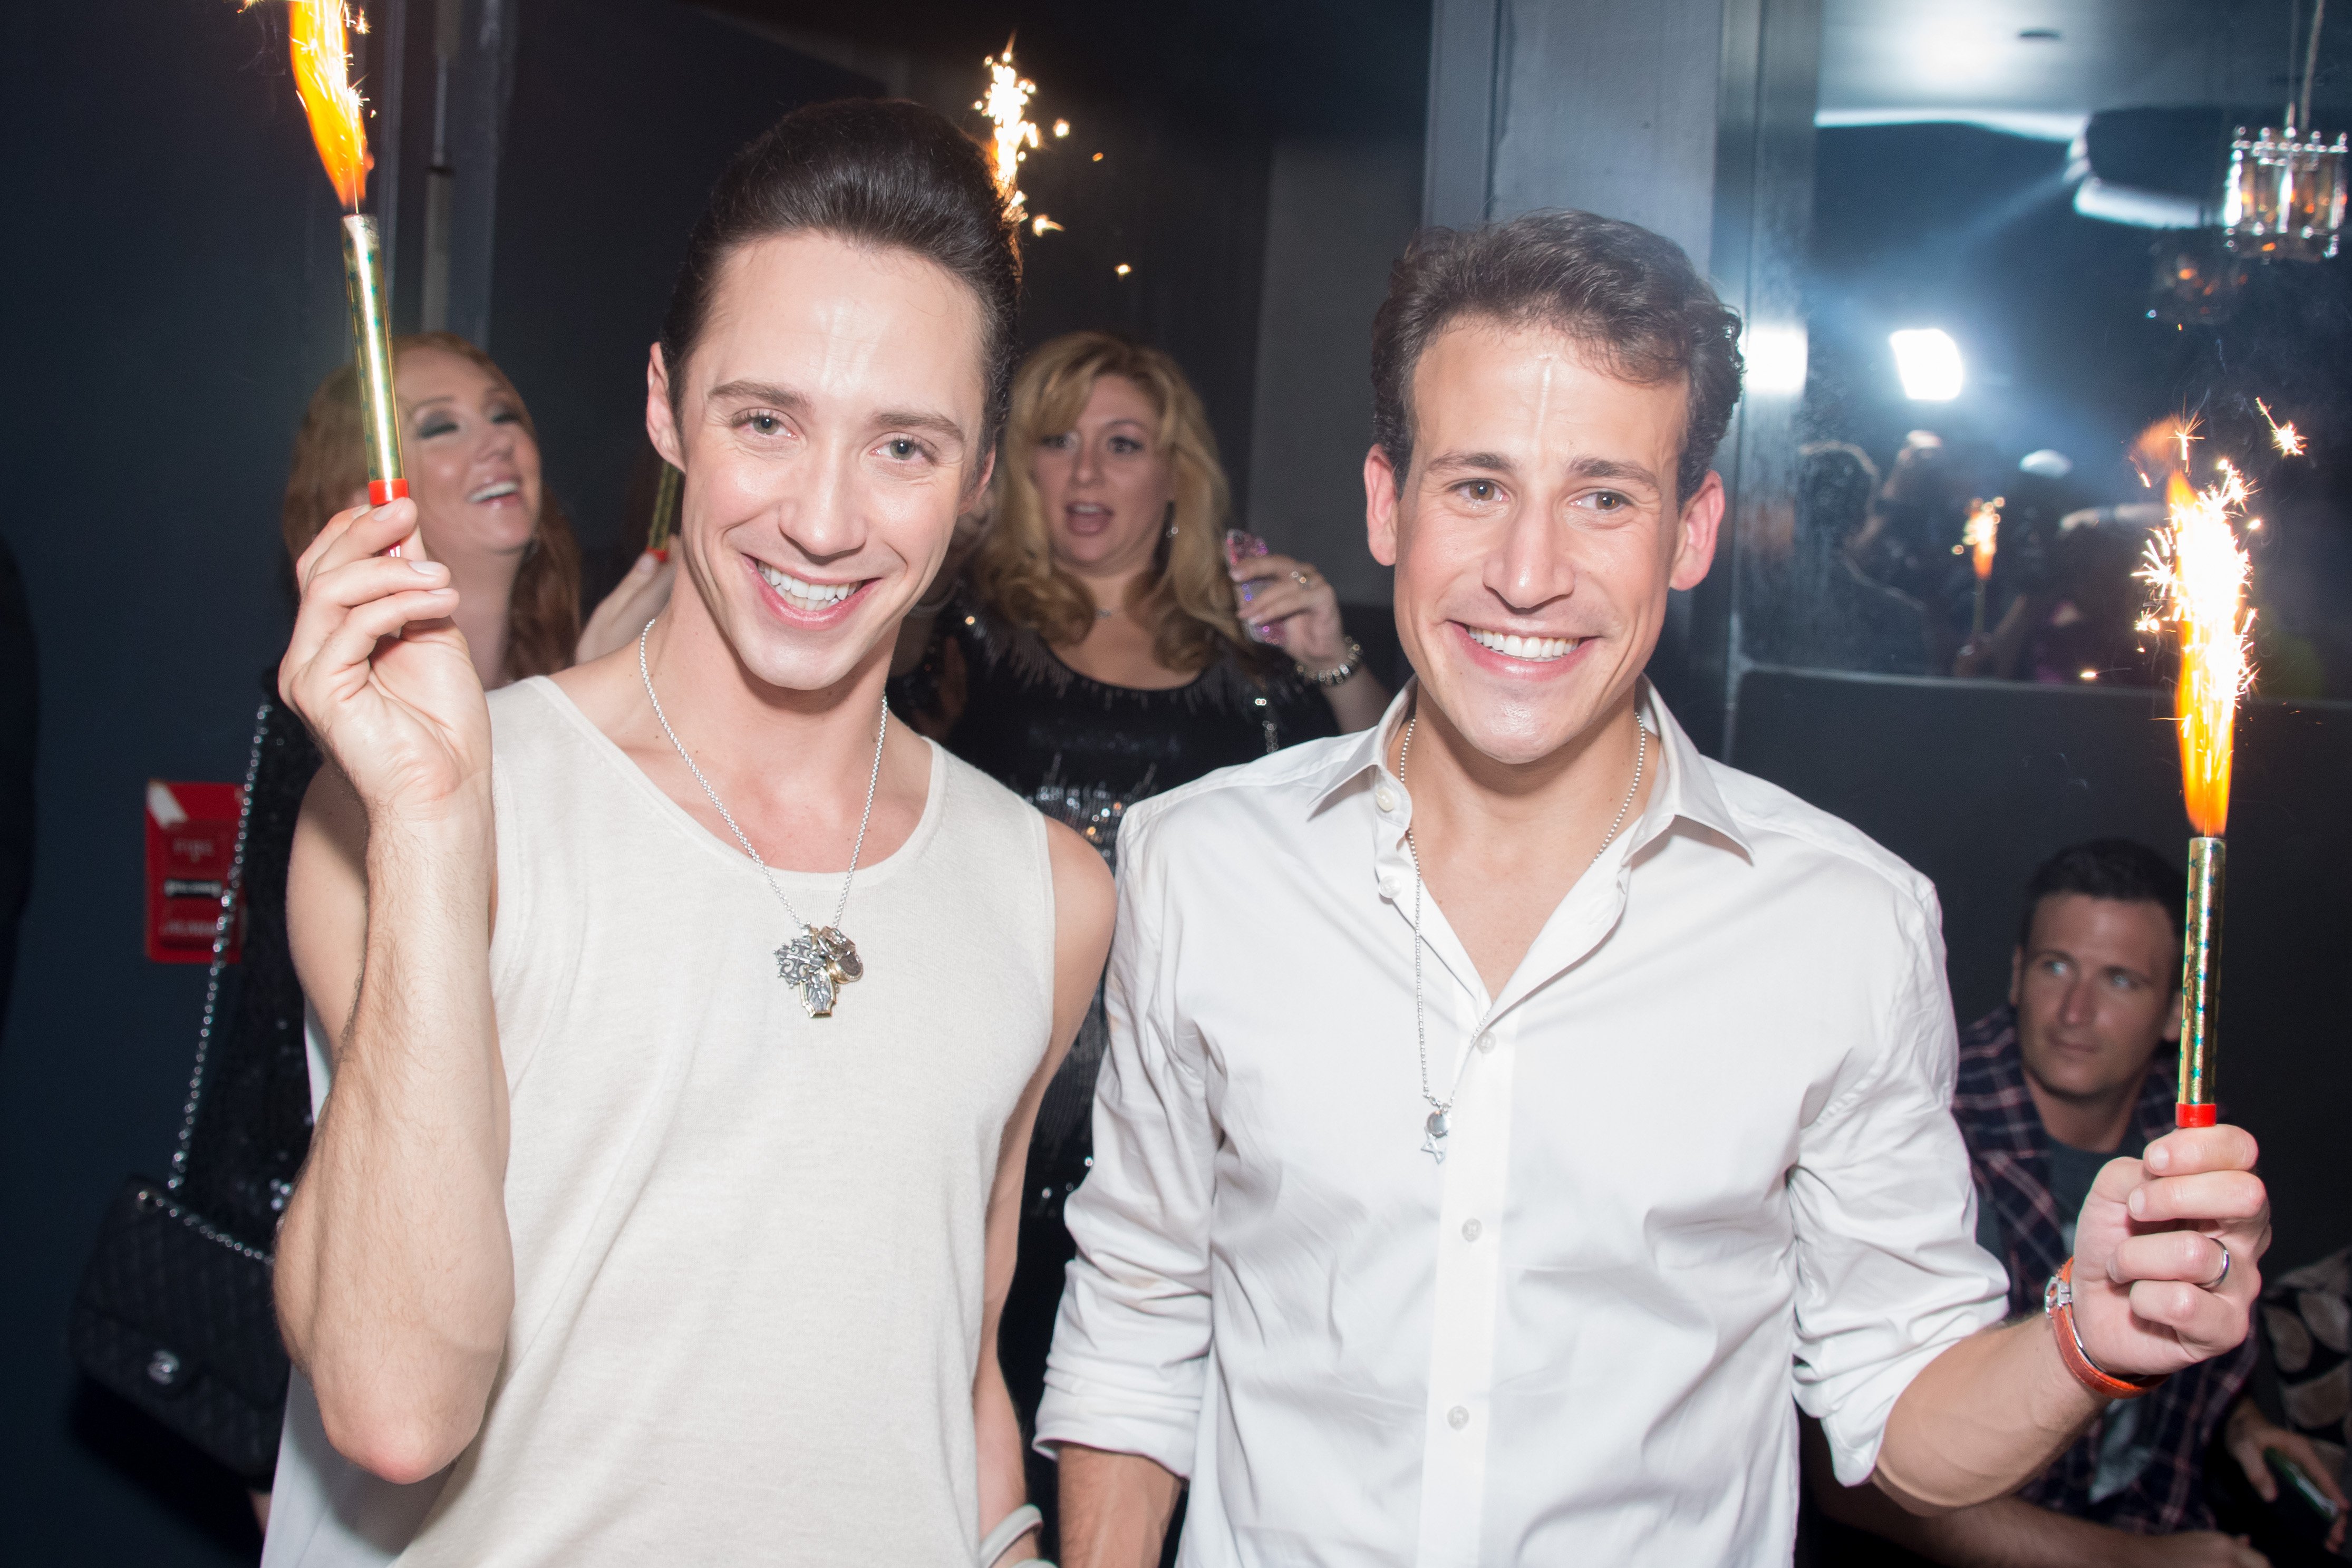 Johnny Weir-Voronov and Victor Weir-Voronov attend their Official Birthday Party at Marcel Hotel in New York City on July 7, 2012 | Source: Getty Images